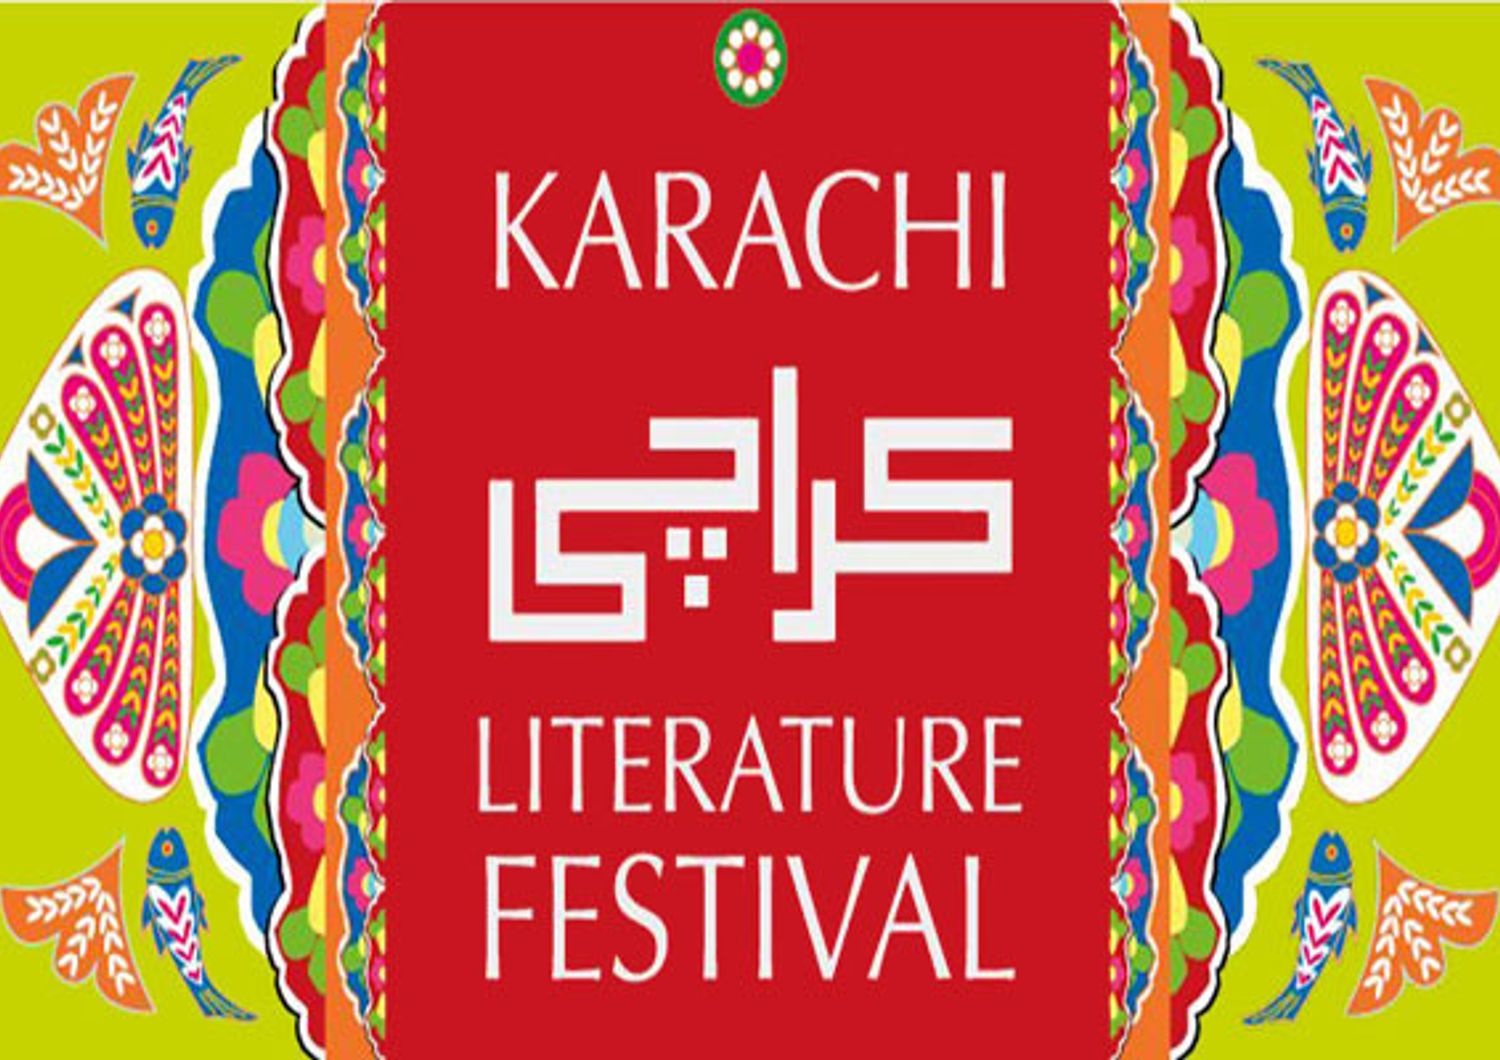 Pakistan: Italy in Karachi Literature Festival with special prize